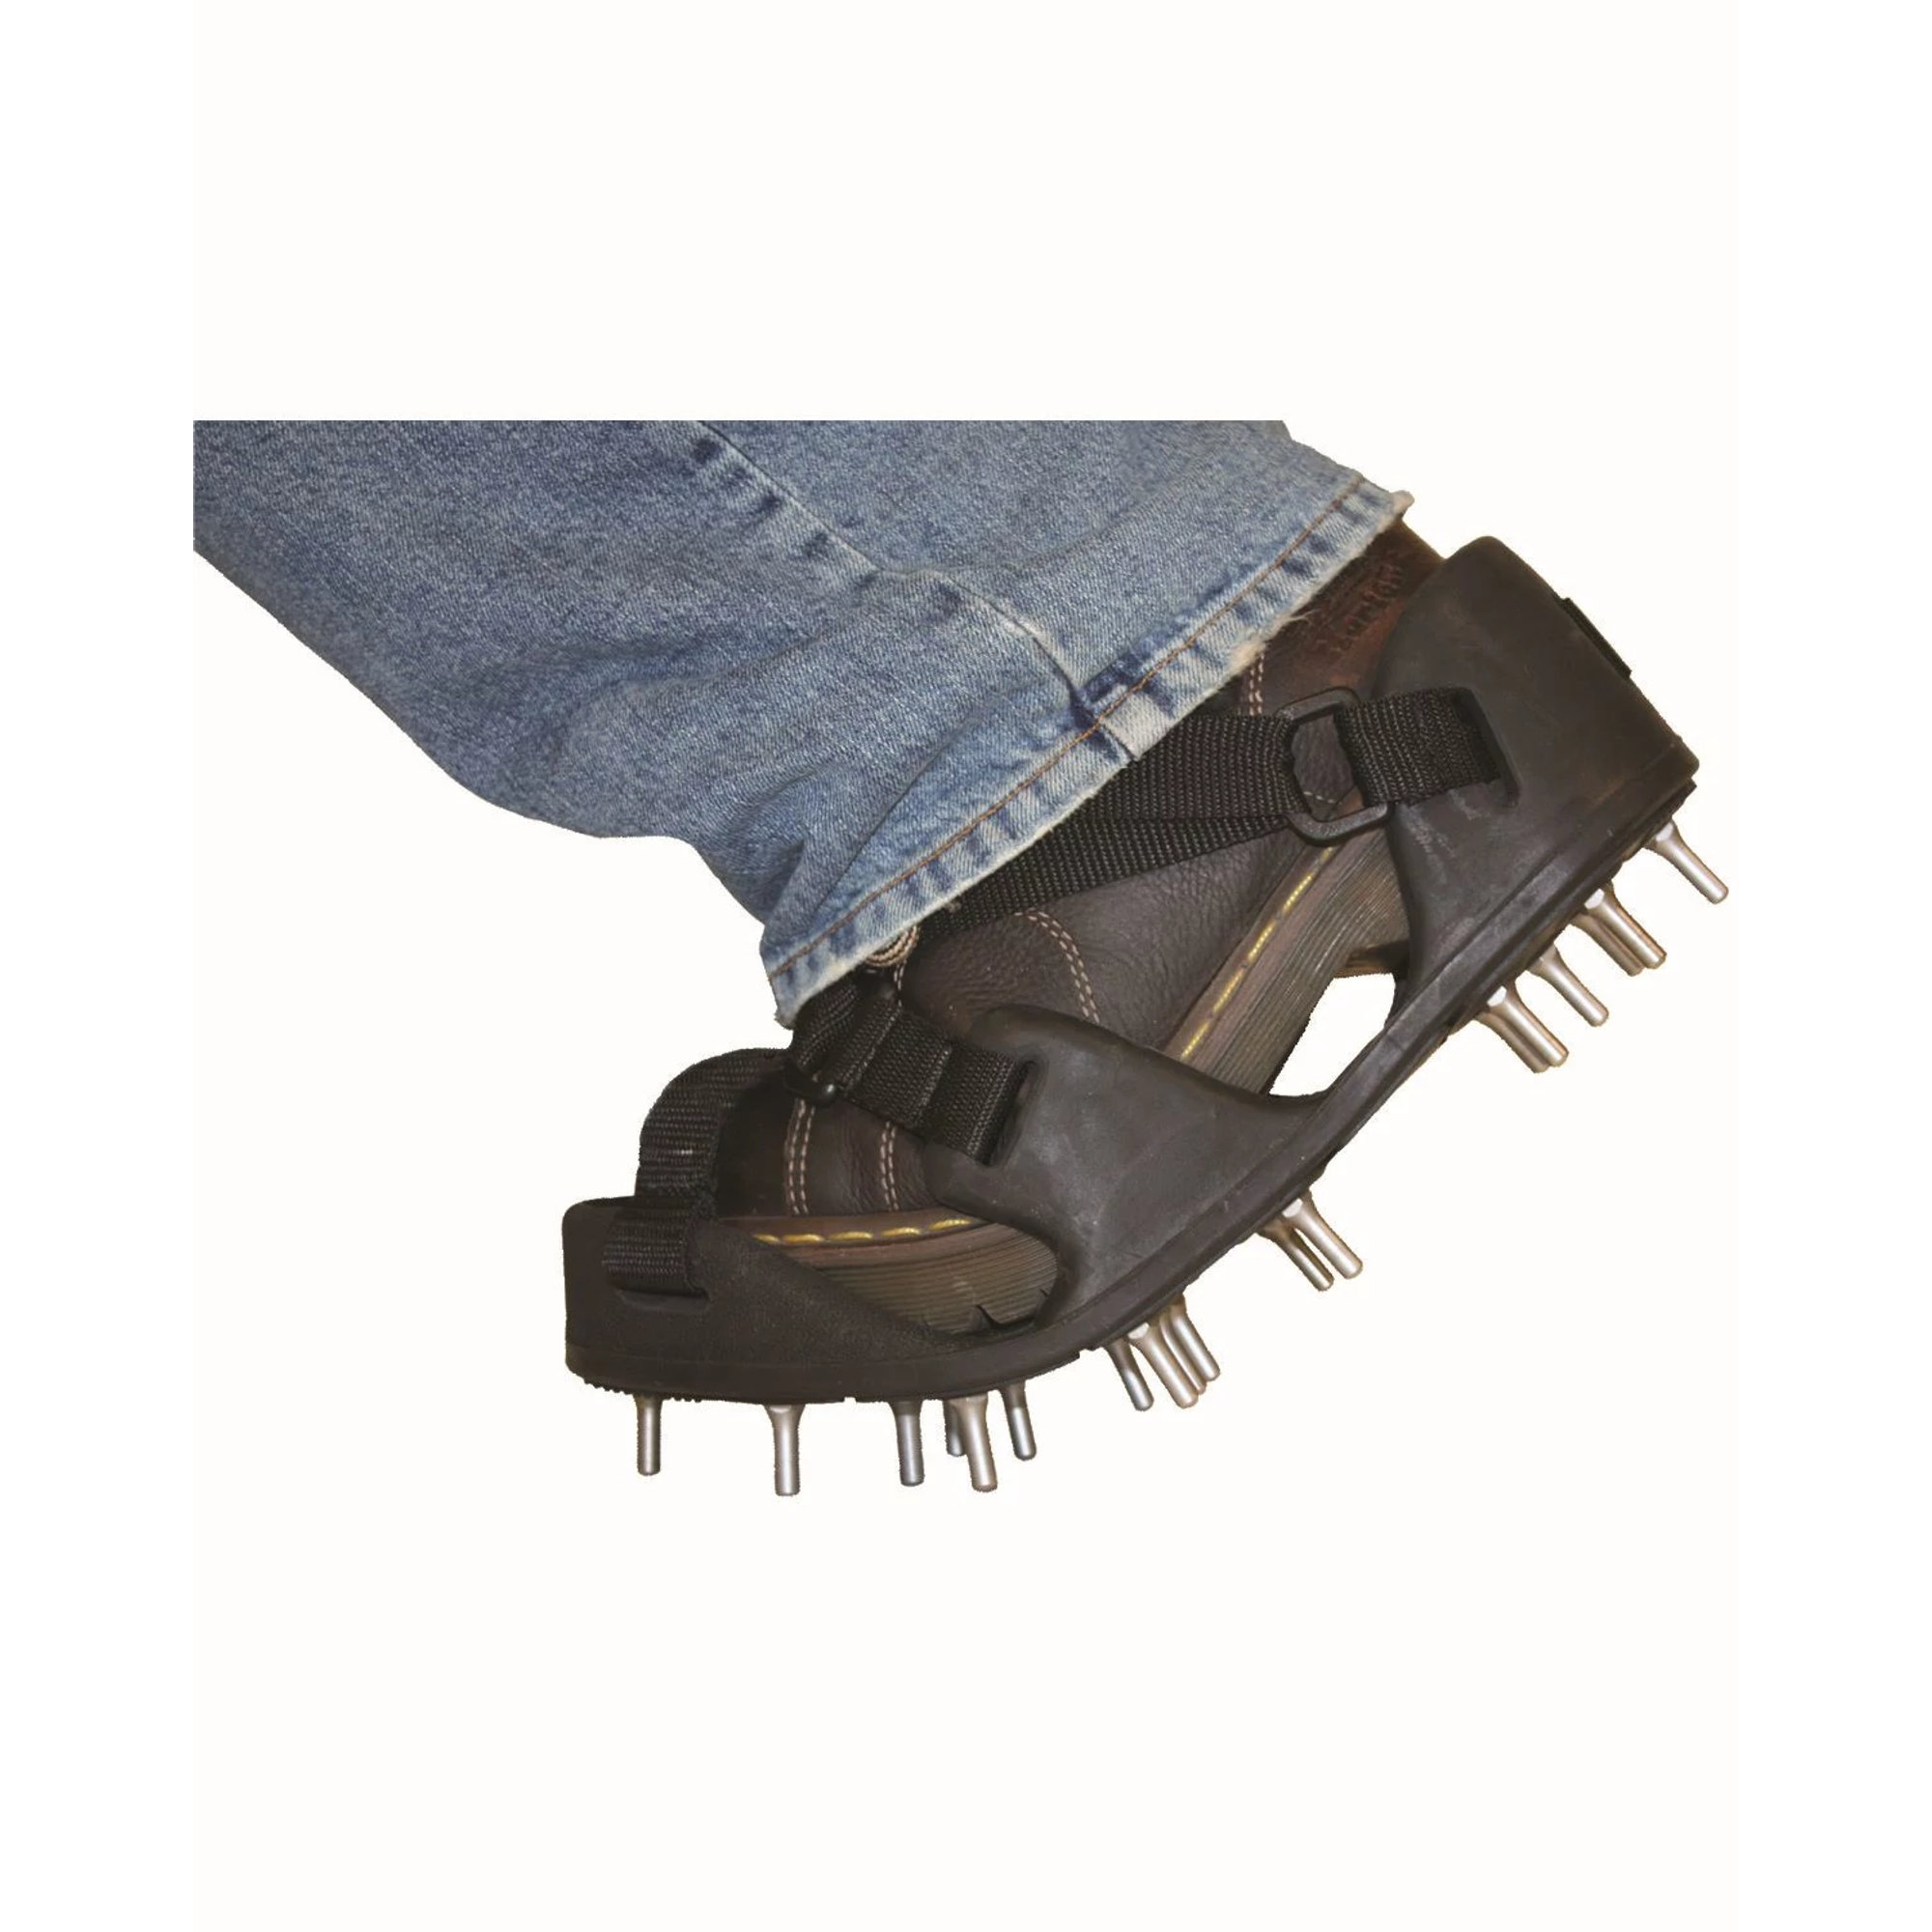 Flexible Bed Spiked Shoes with 7/8 Rounded Tip Spikes - XL (Shoe Size 12 -  13-1/2)